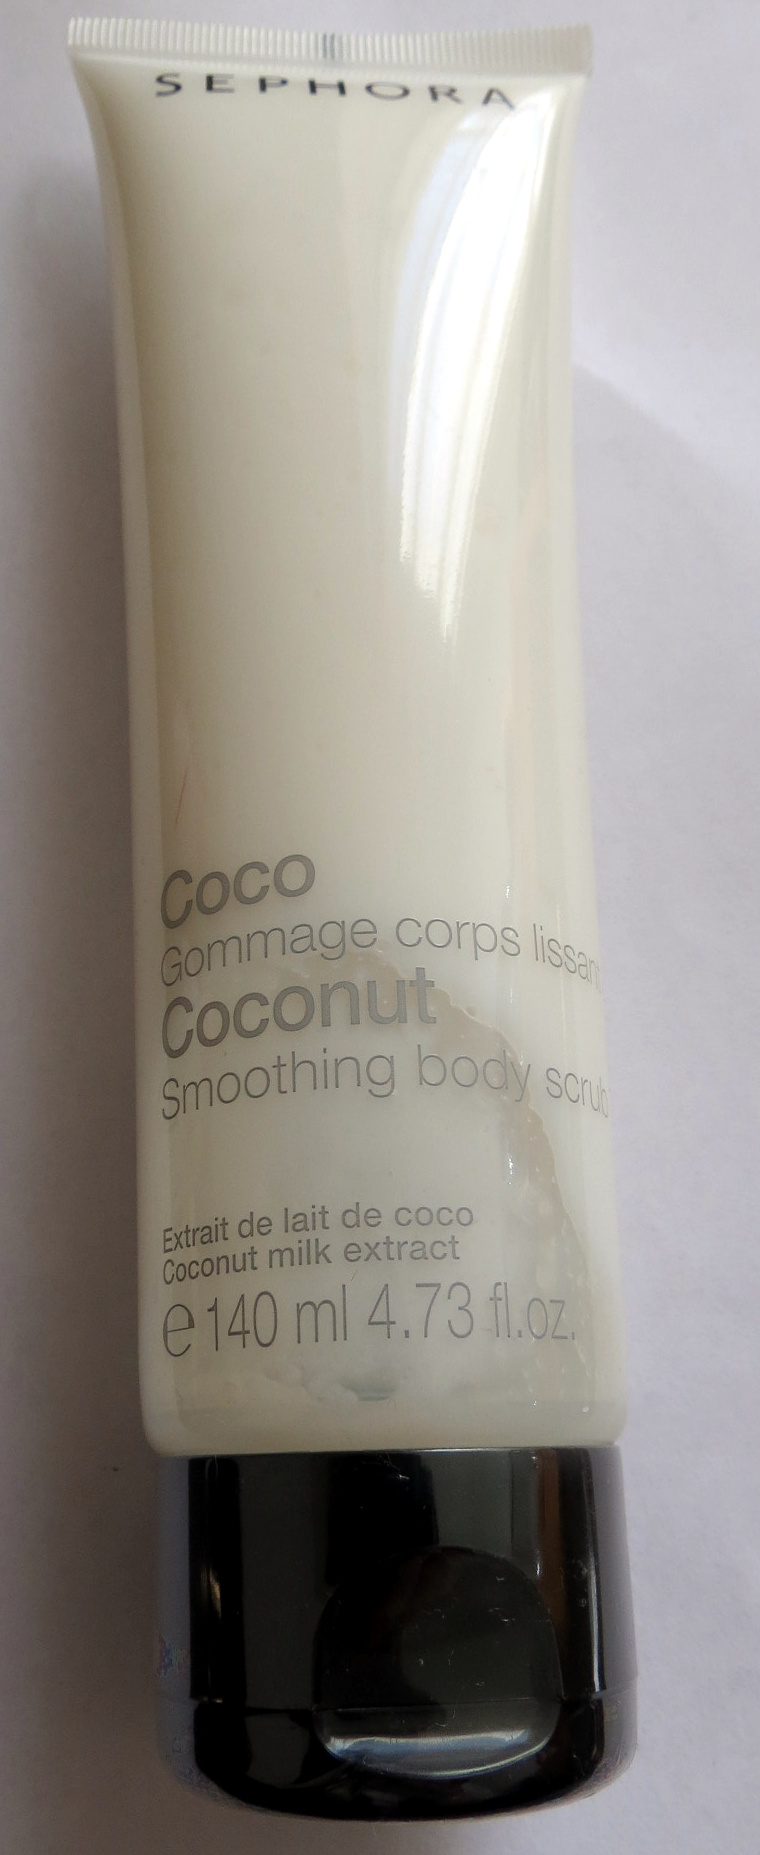 Coco gommage corps lissant - Product - fr